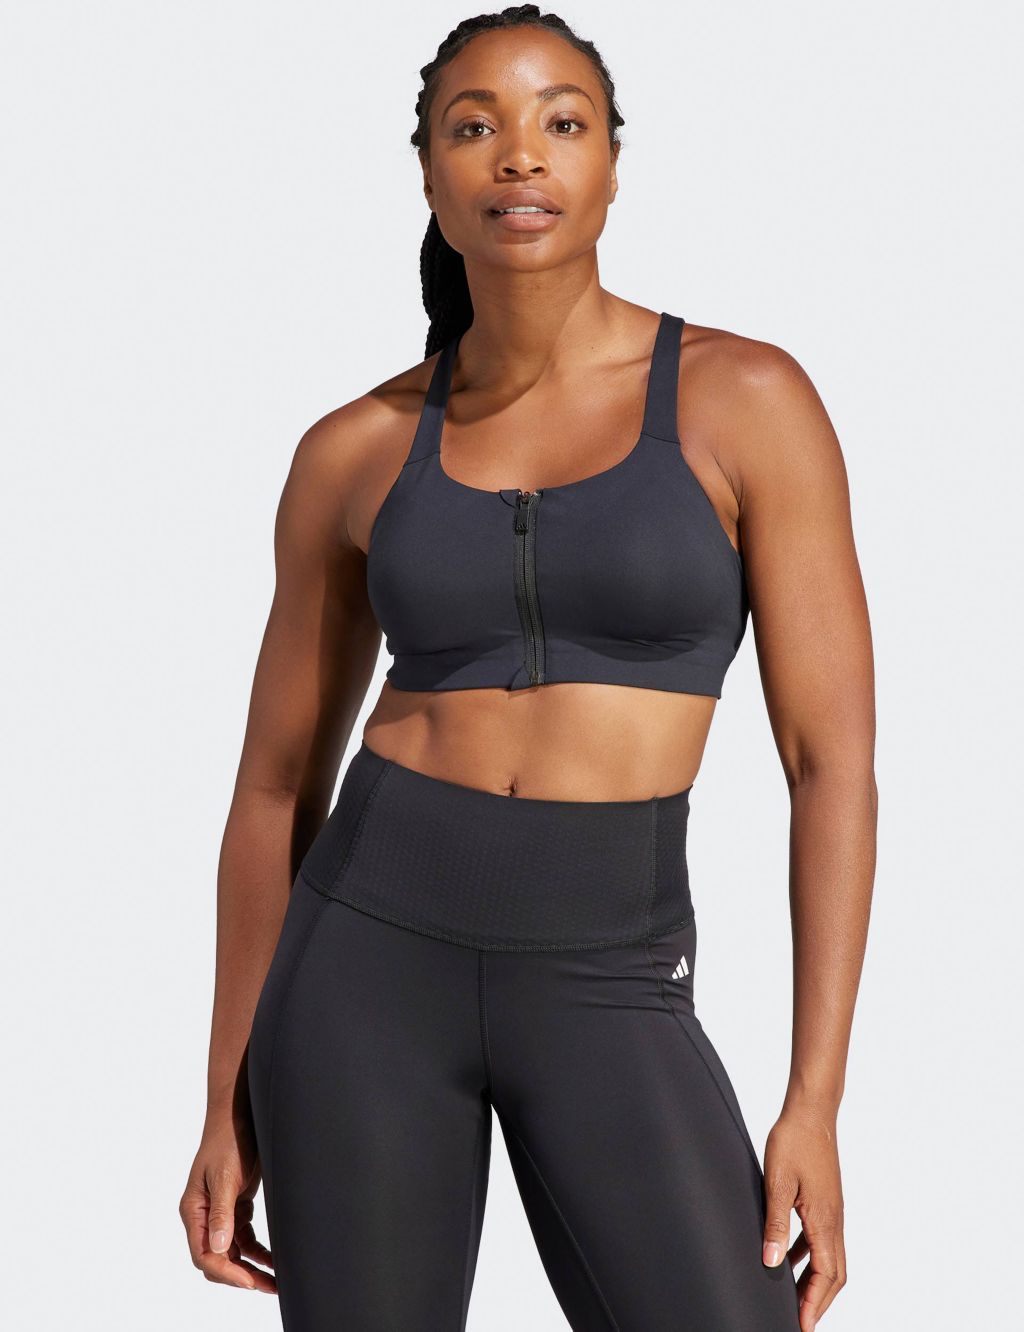 TLRD Impact Luxe High Support Sports Bra